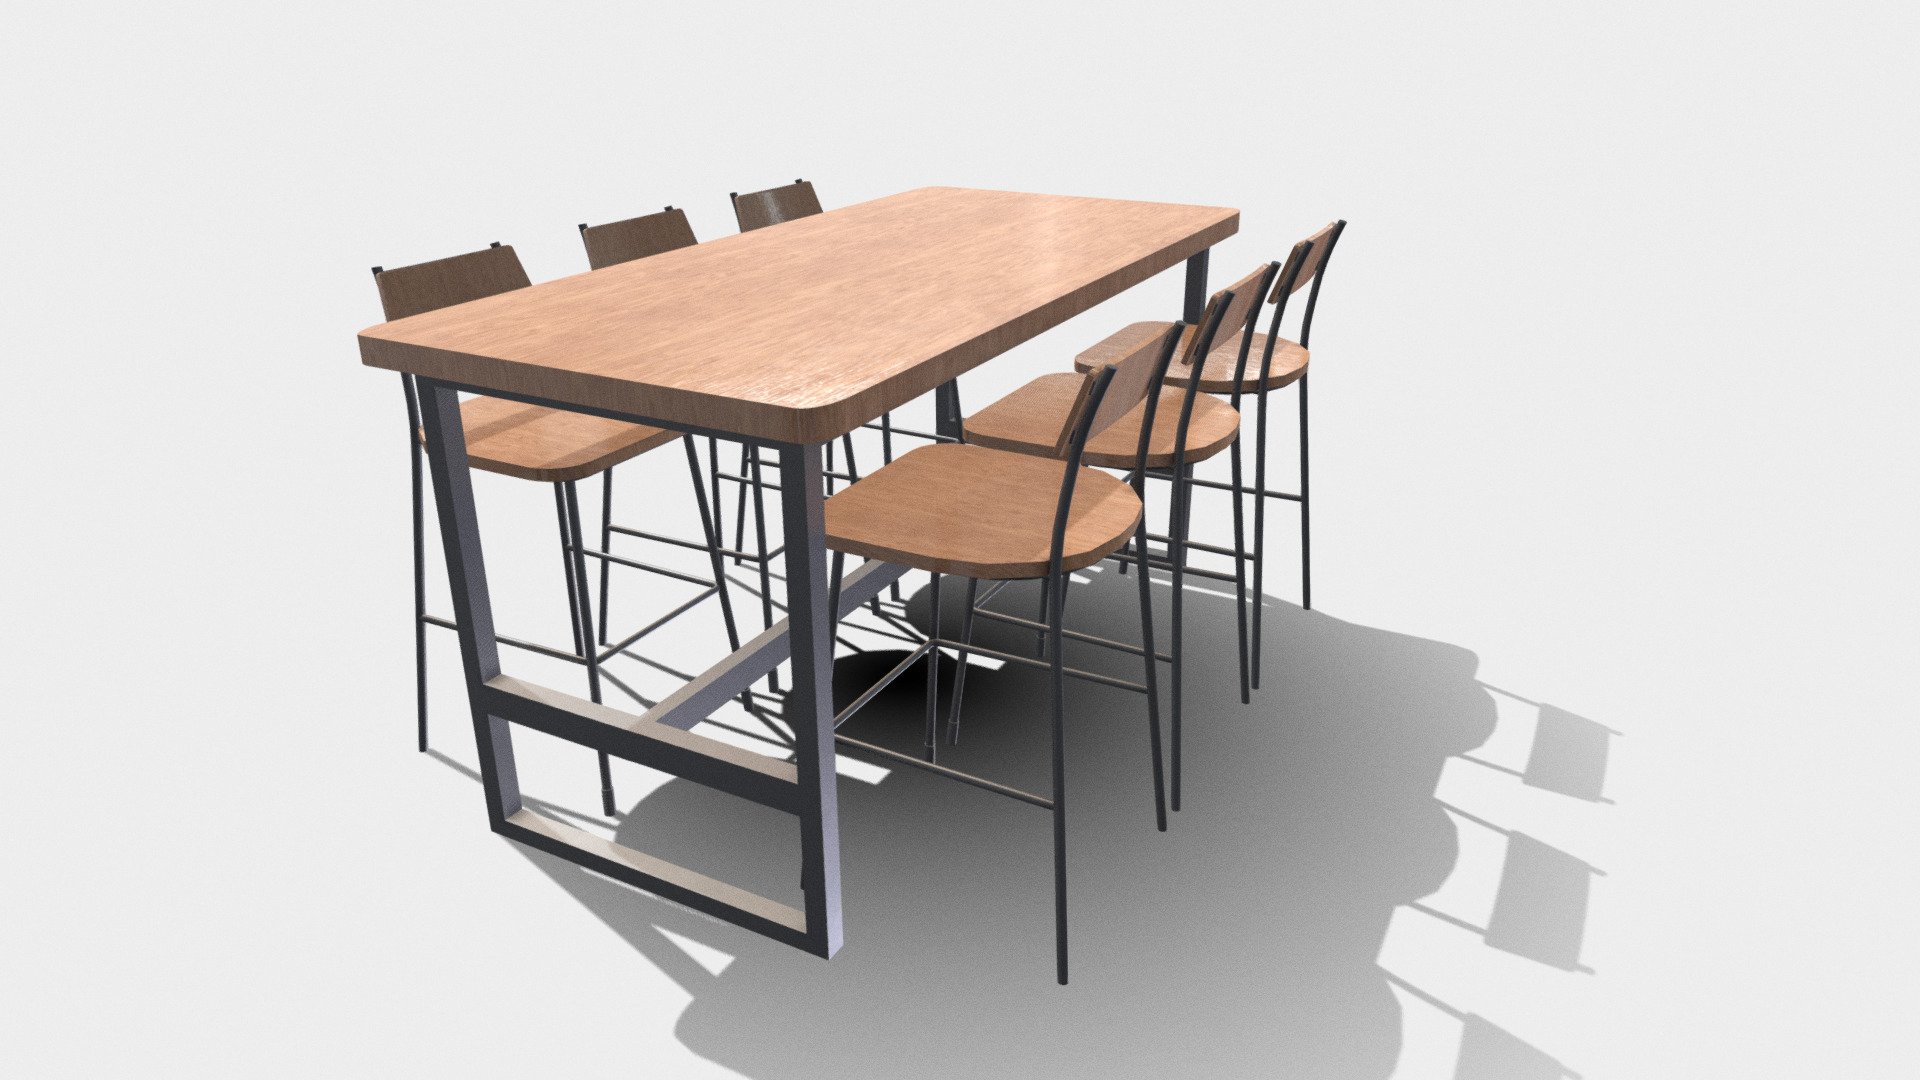 Lowpoly 3d Model Coffee Shop high table and chair modeling in blender and texturing in Substance Painter PBR texture with 2K Resolution

Hope you like this 3D Model

Thank you! - Coffee Shop High Chair And Table - Buy Royalty Free 3D model by cuankiproduction 3d model